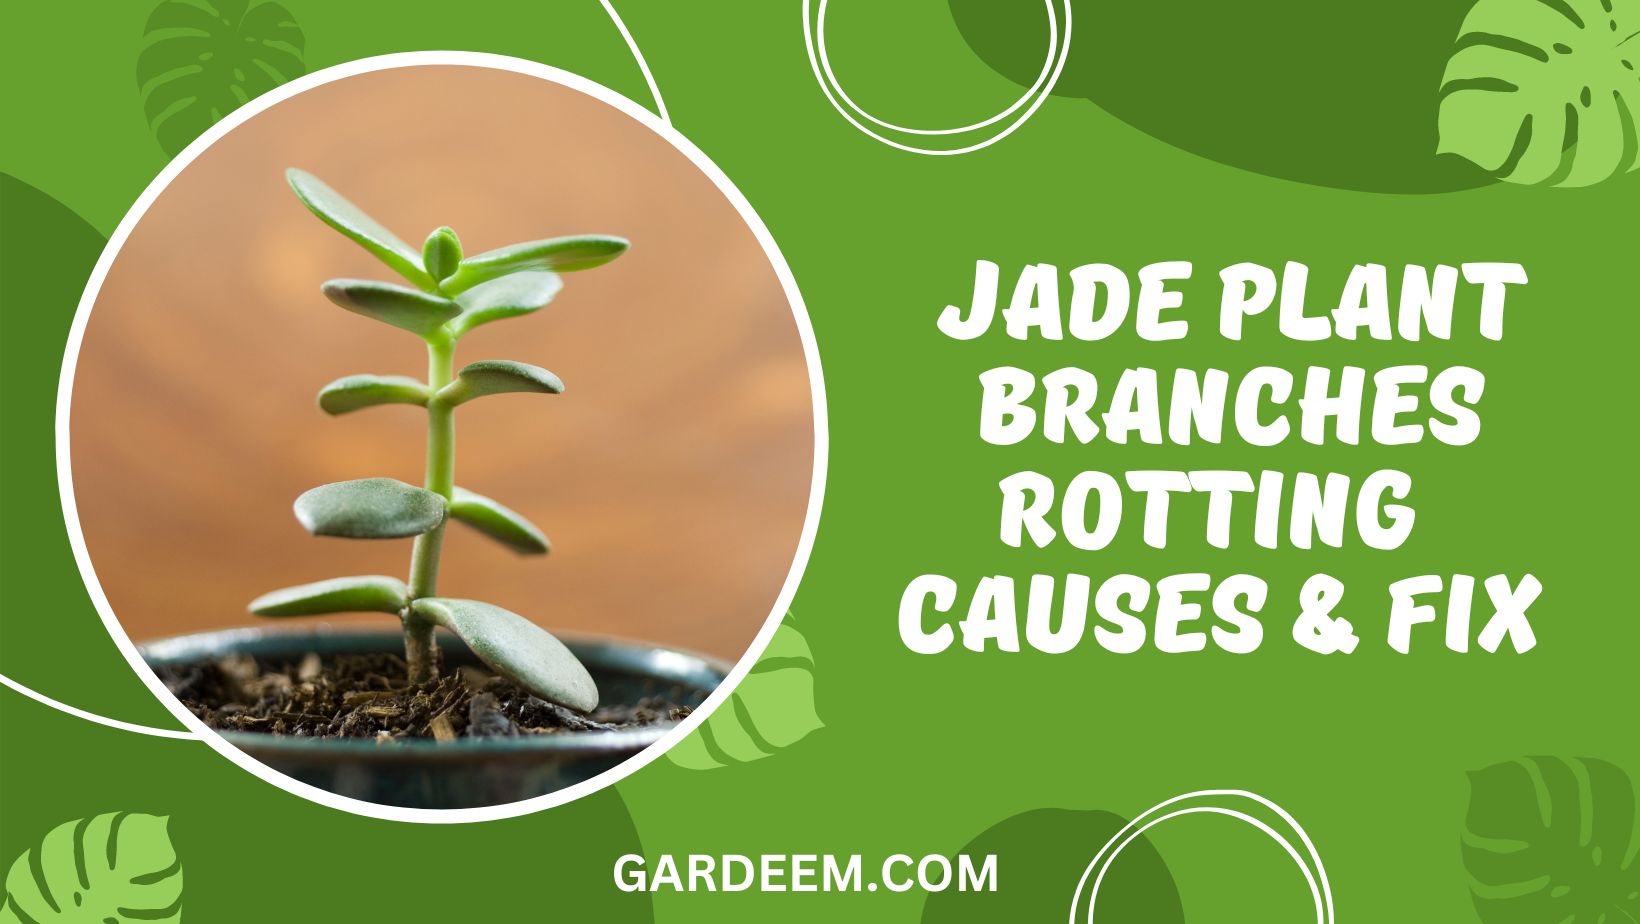 Jade Plant Branches Rotting